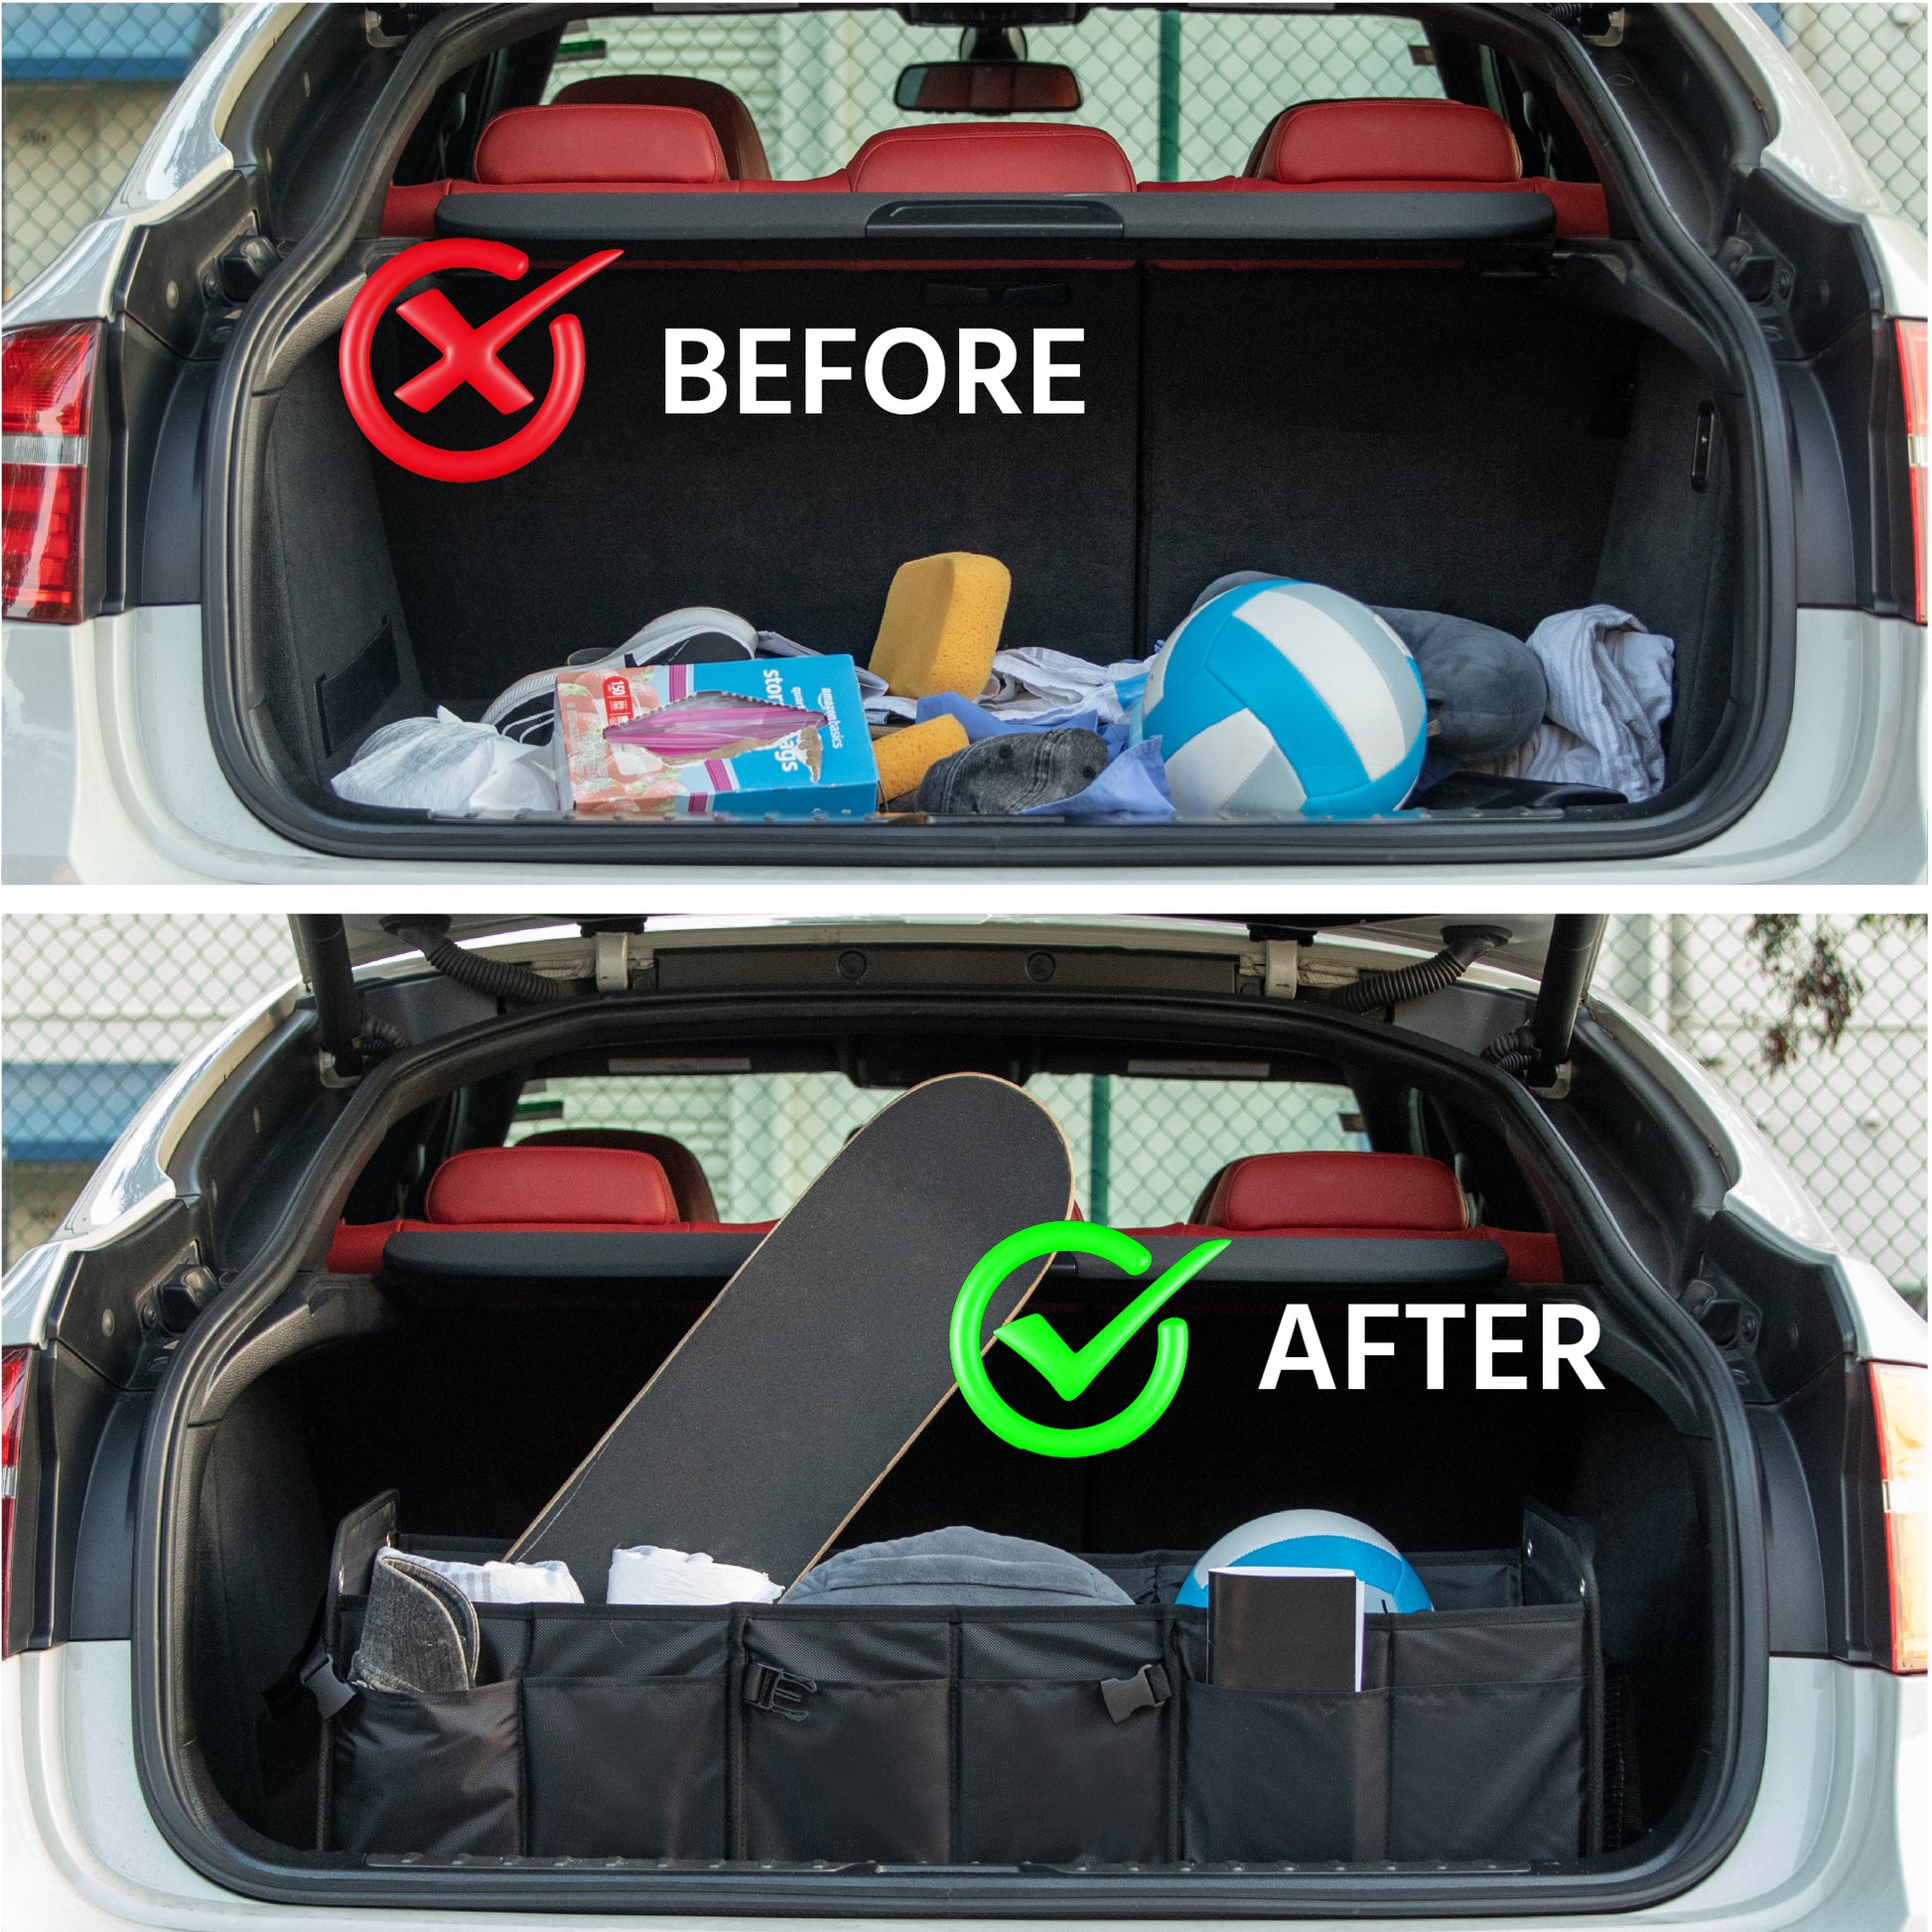 meistar Multi Compartments Collapsible Portable Car Trunk Organizer an